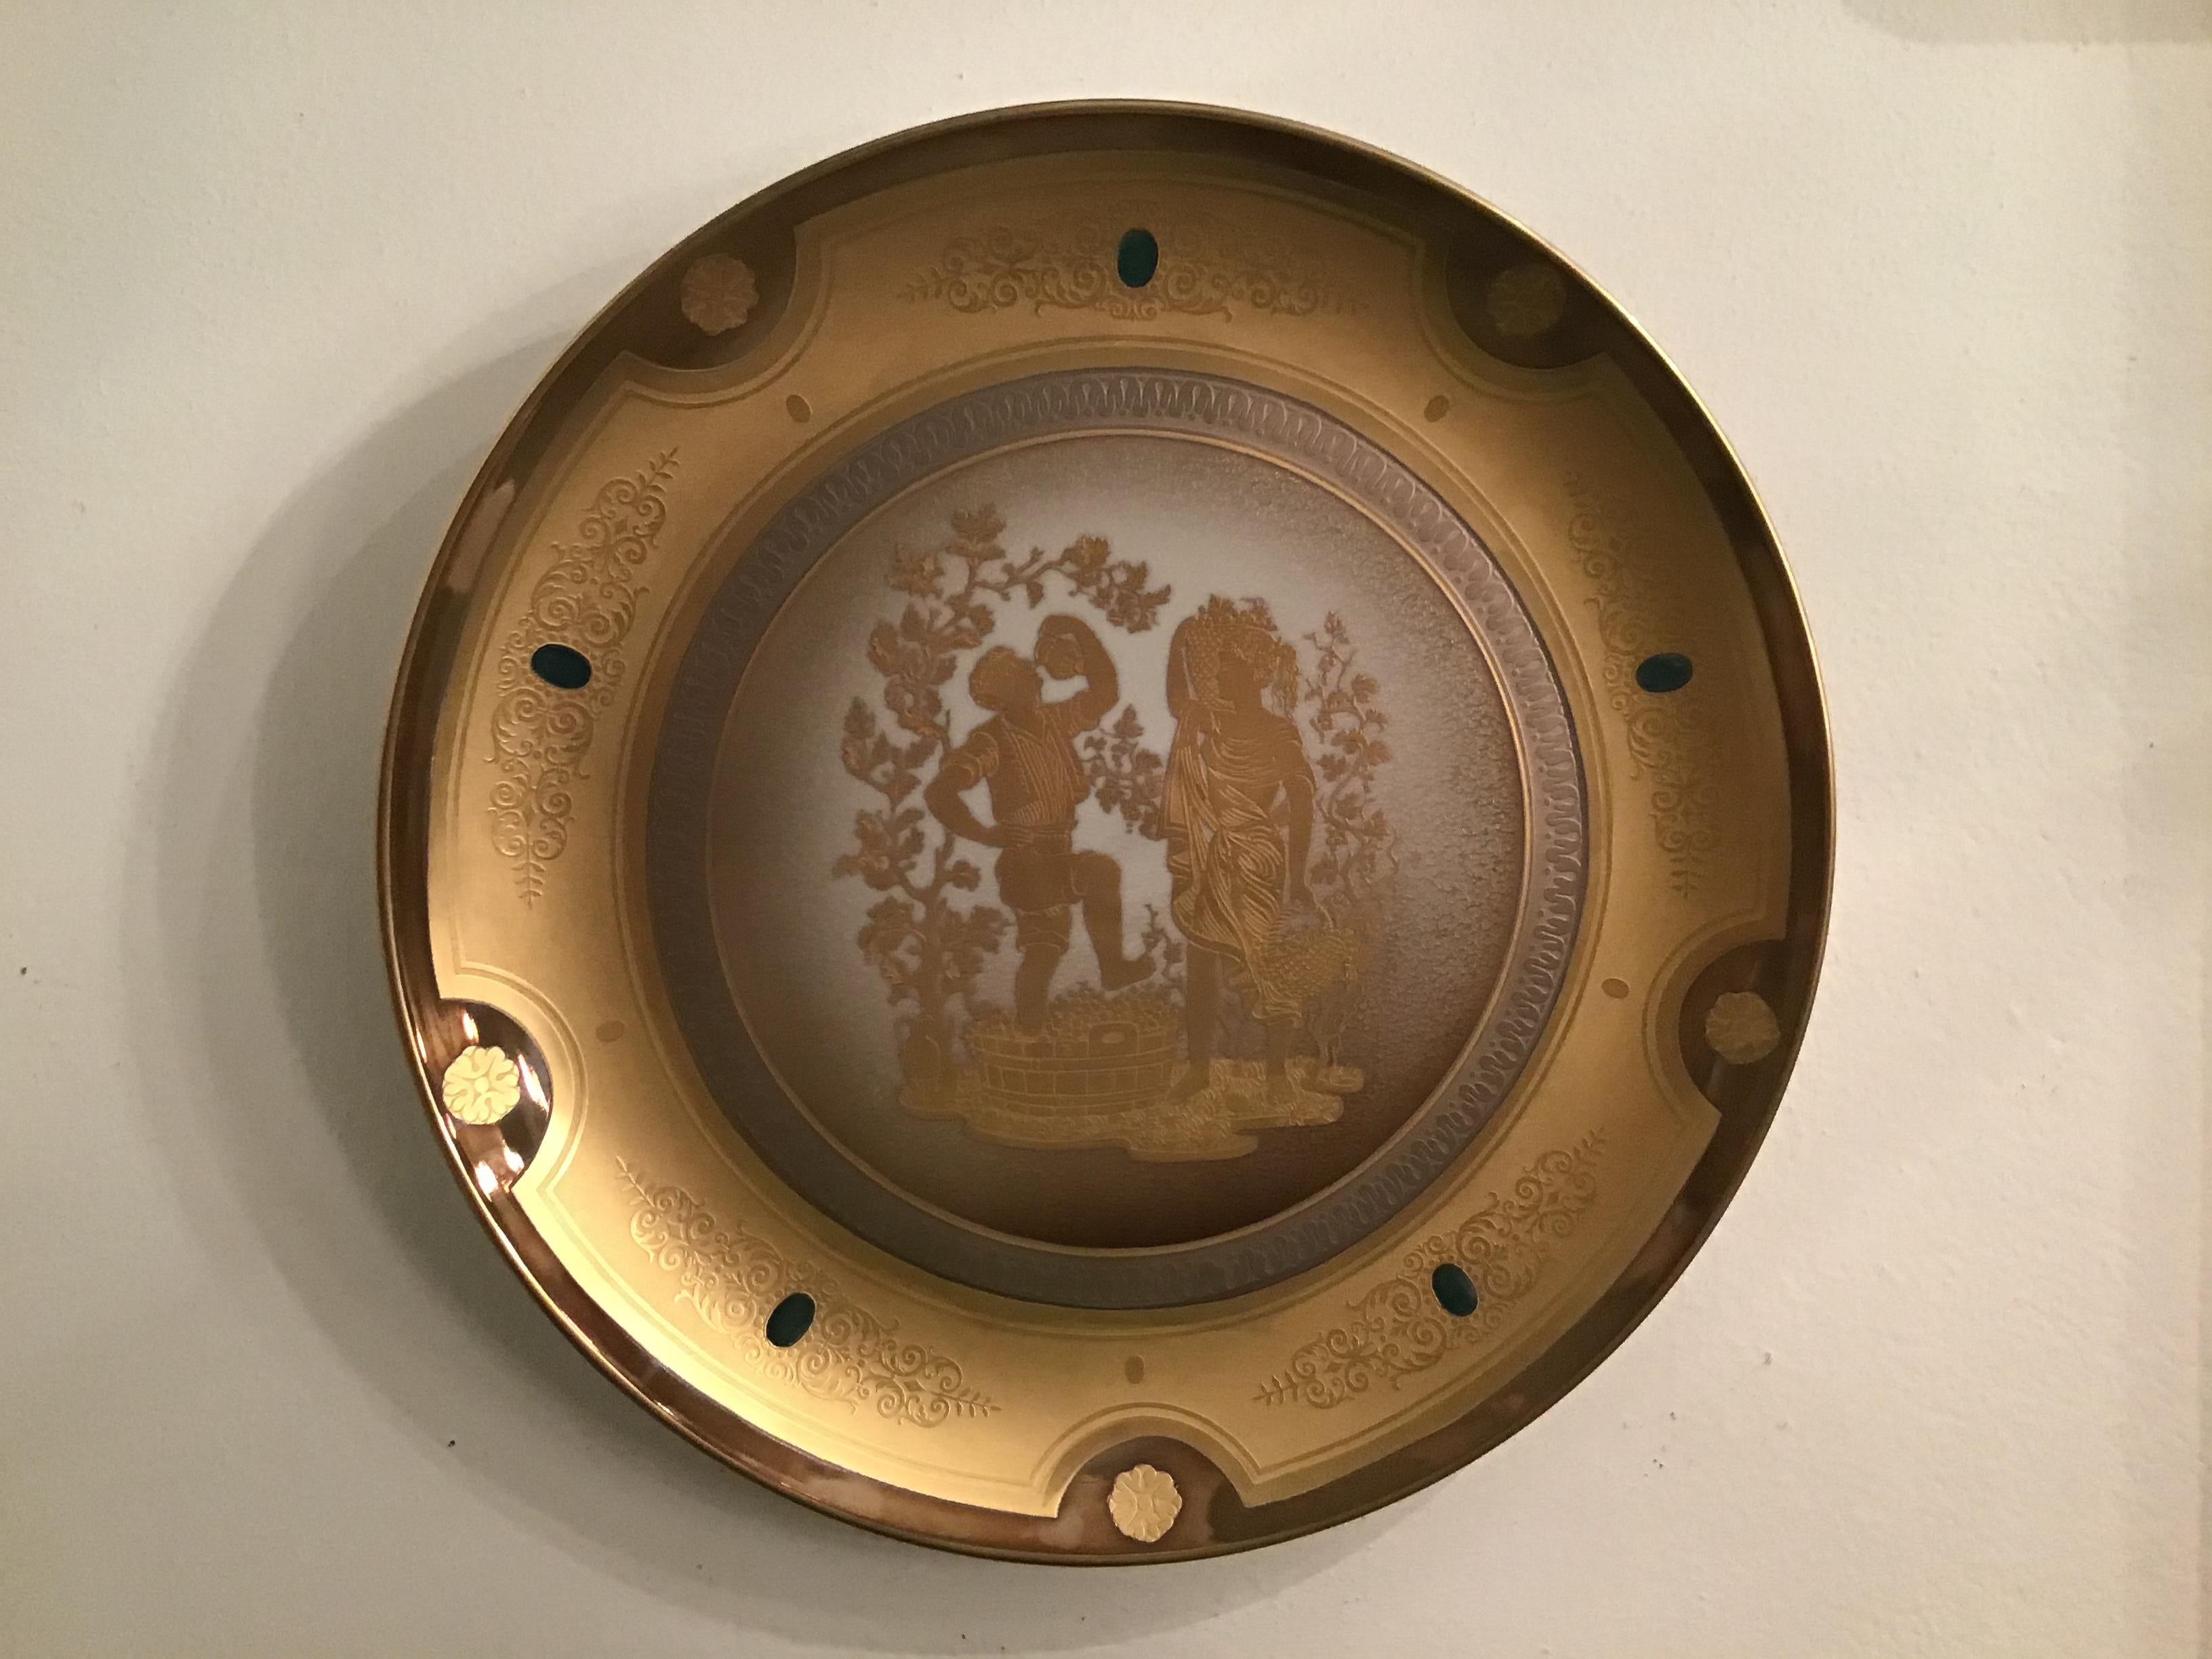 Morbelli Porcelain Wall Plate Gold “ Autunno”, 1960, Italy For Sale 10